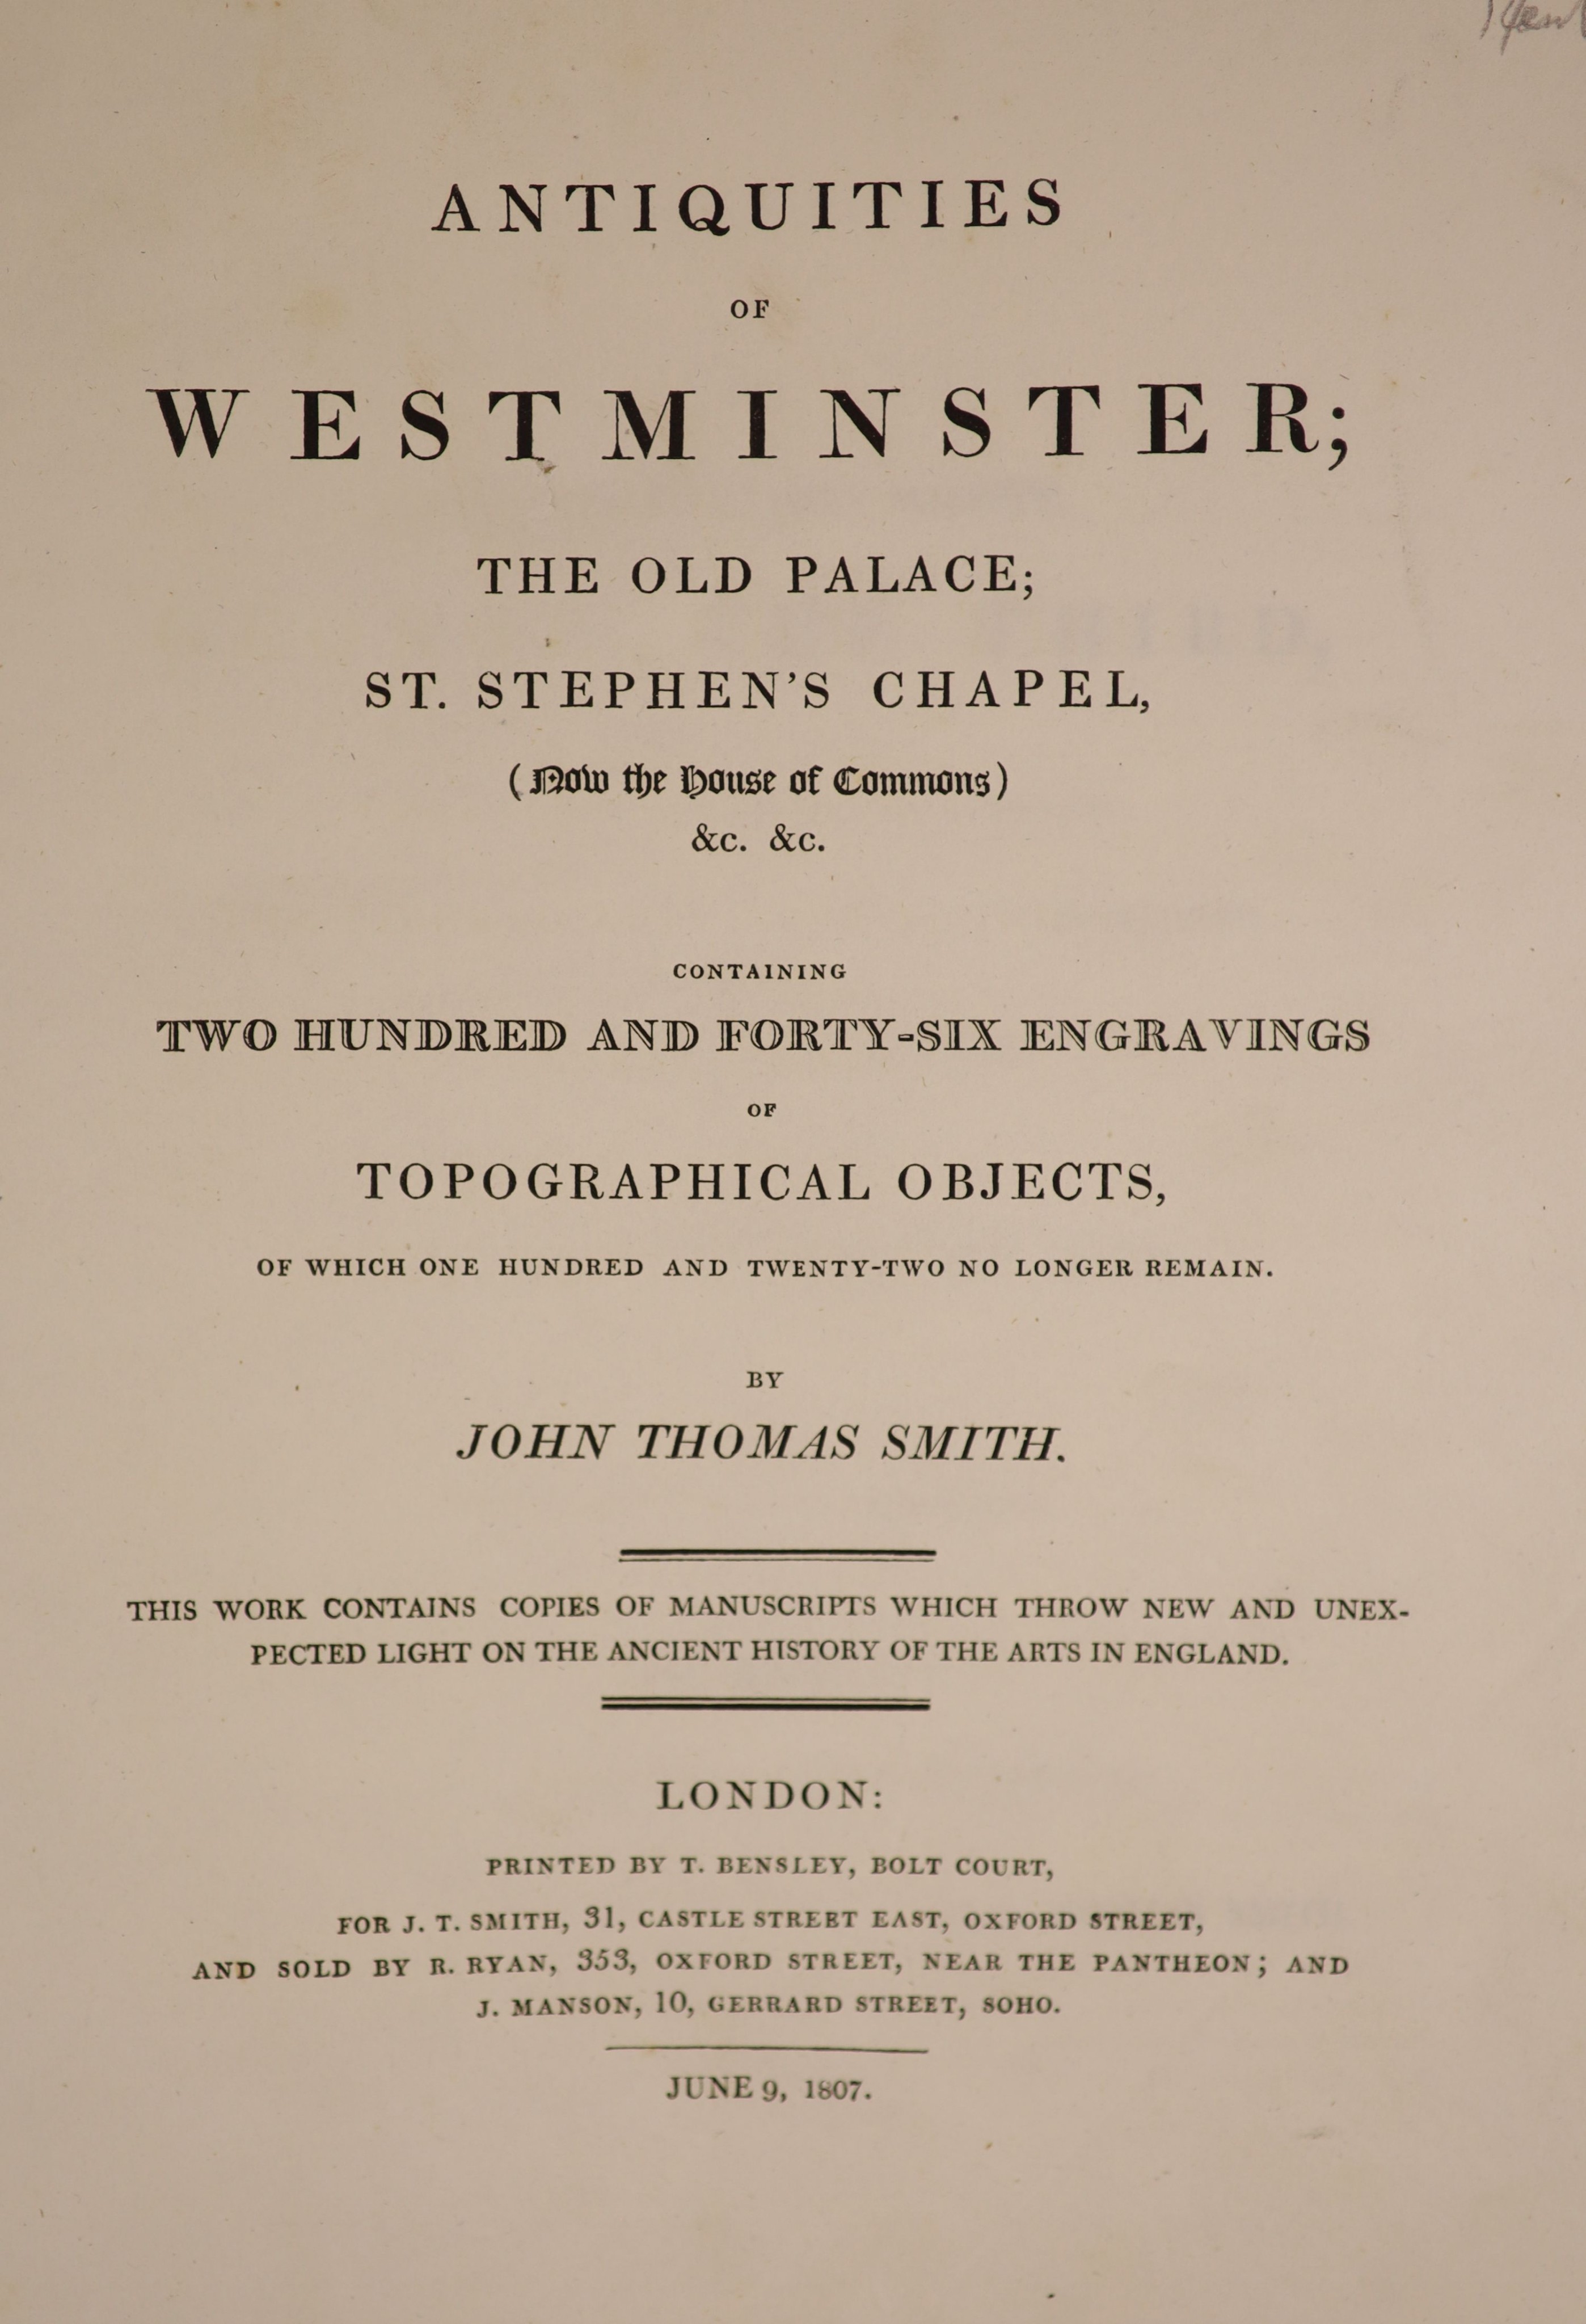 Smith, John Thomas - Antiquities of Westminster, 2 vols in 1, qto, calf, with 100 plates, some hand-coloured, and further 62 extra plates bound in, T. Bensley, London, 1807- [9]